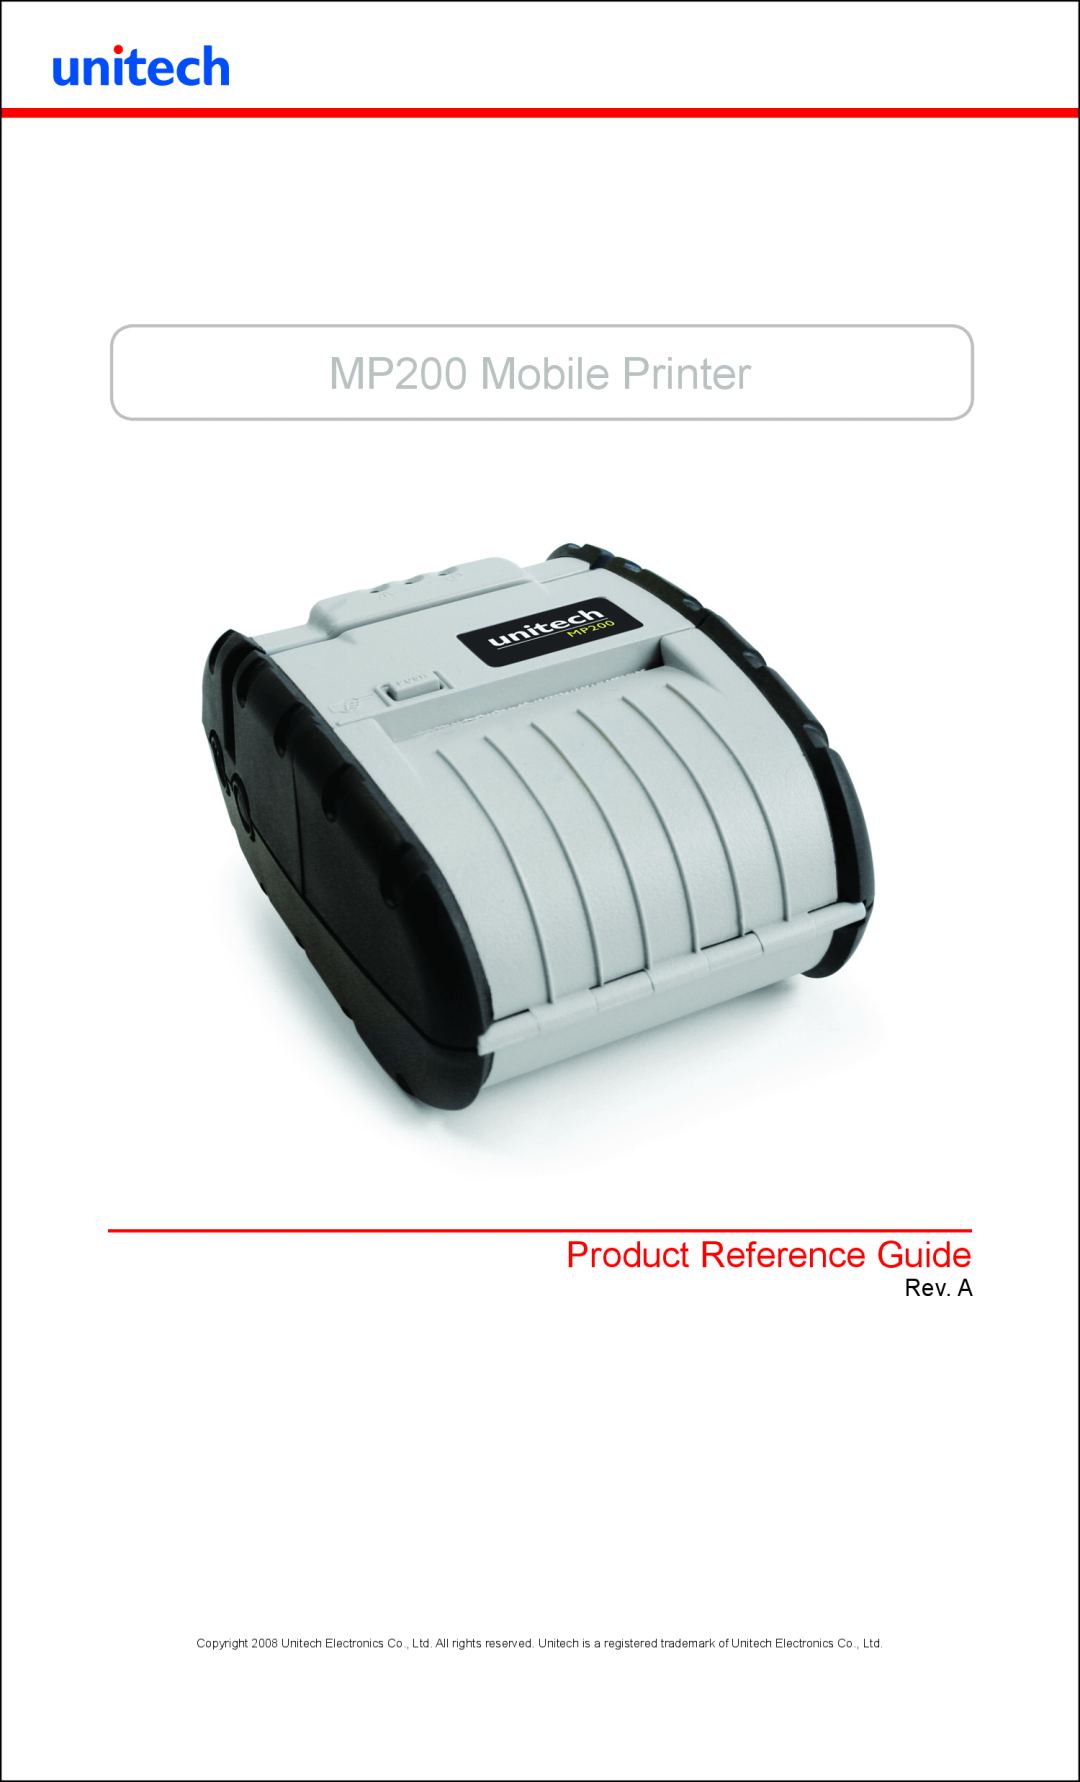 Unitech manual MP200 Mobile Printer, Product Reference Guide 